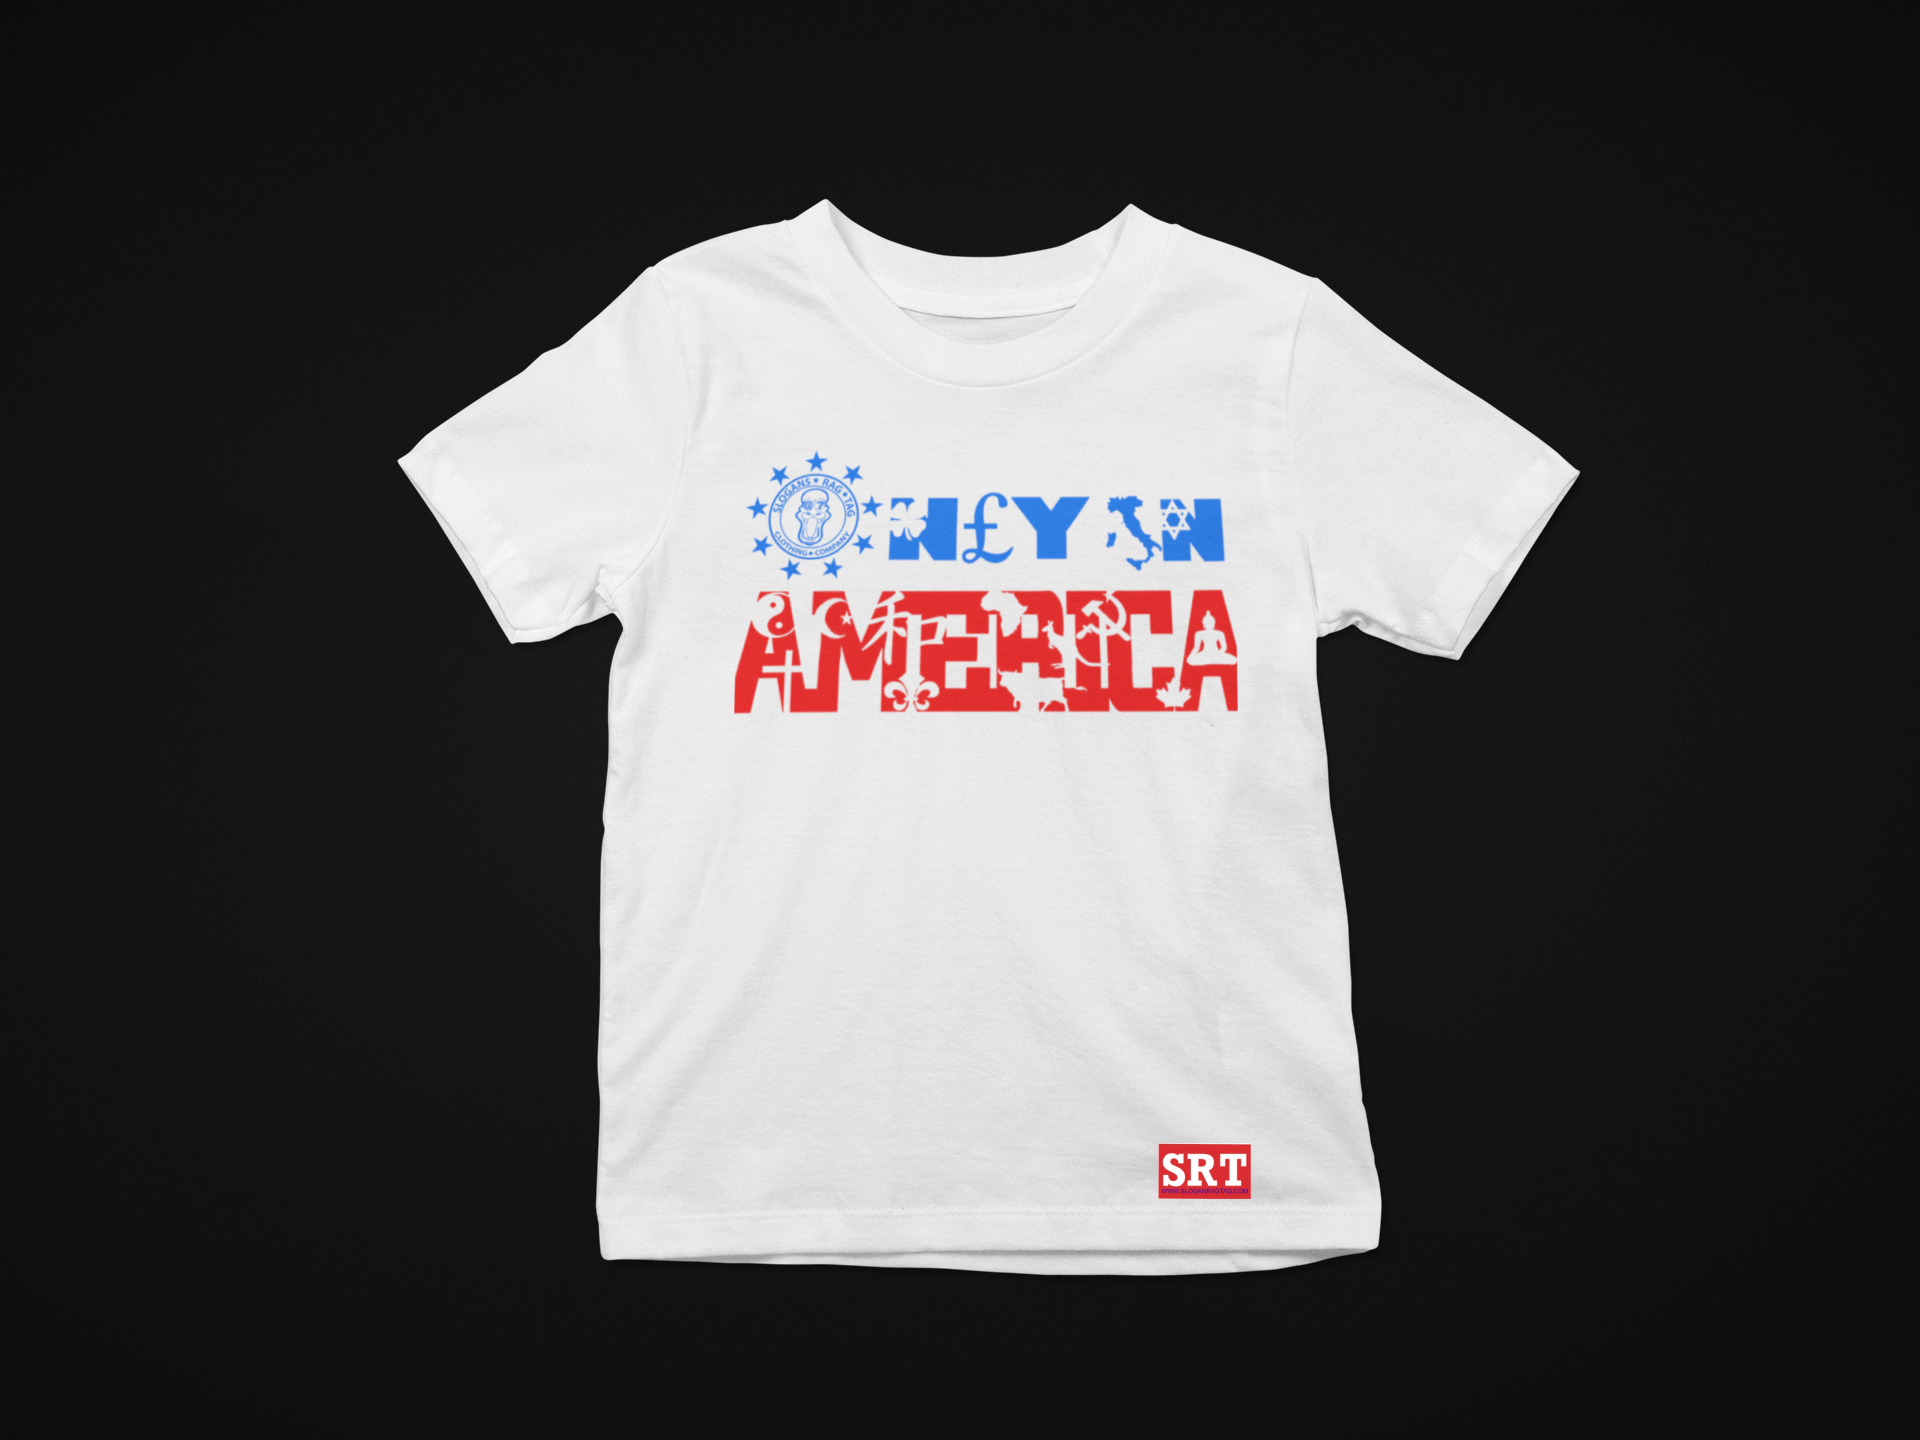 Only in America KIDS T-Shirt